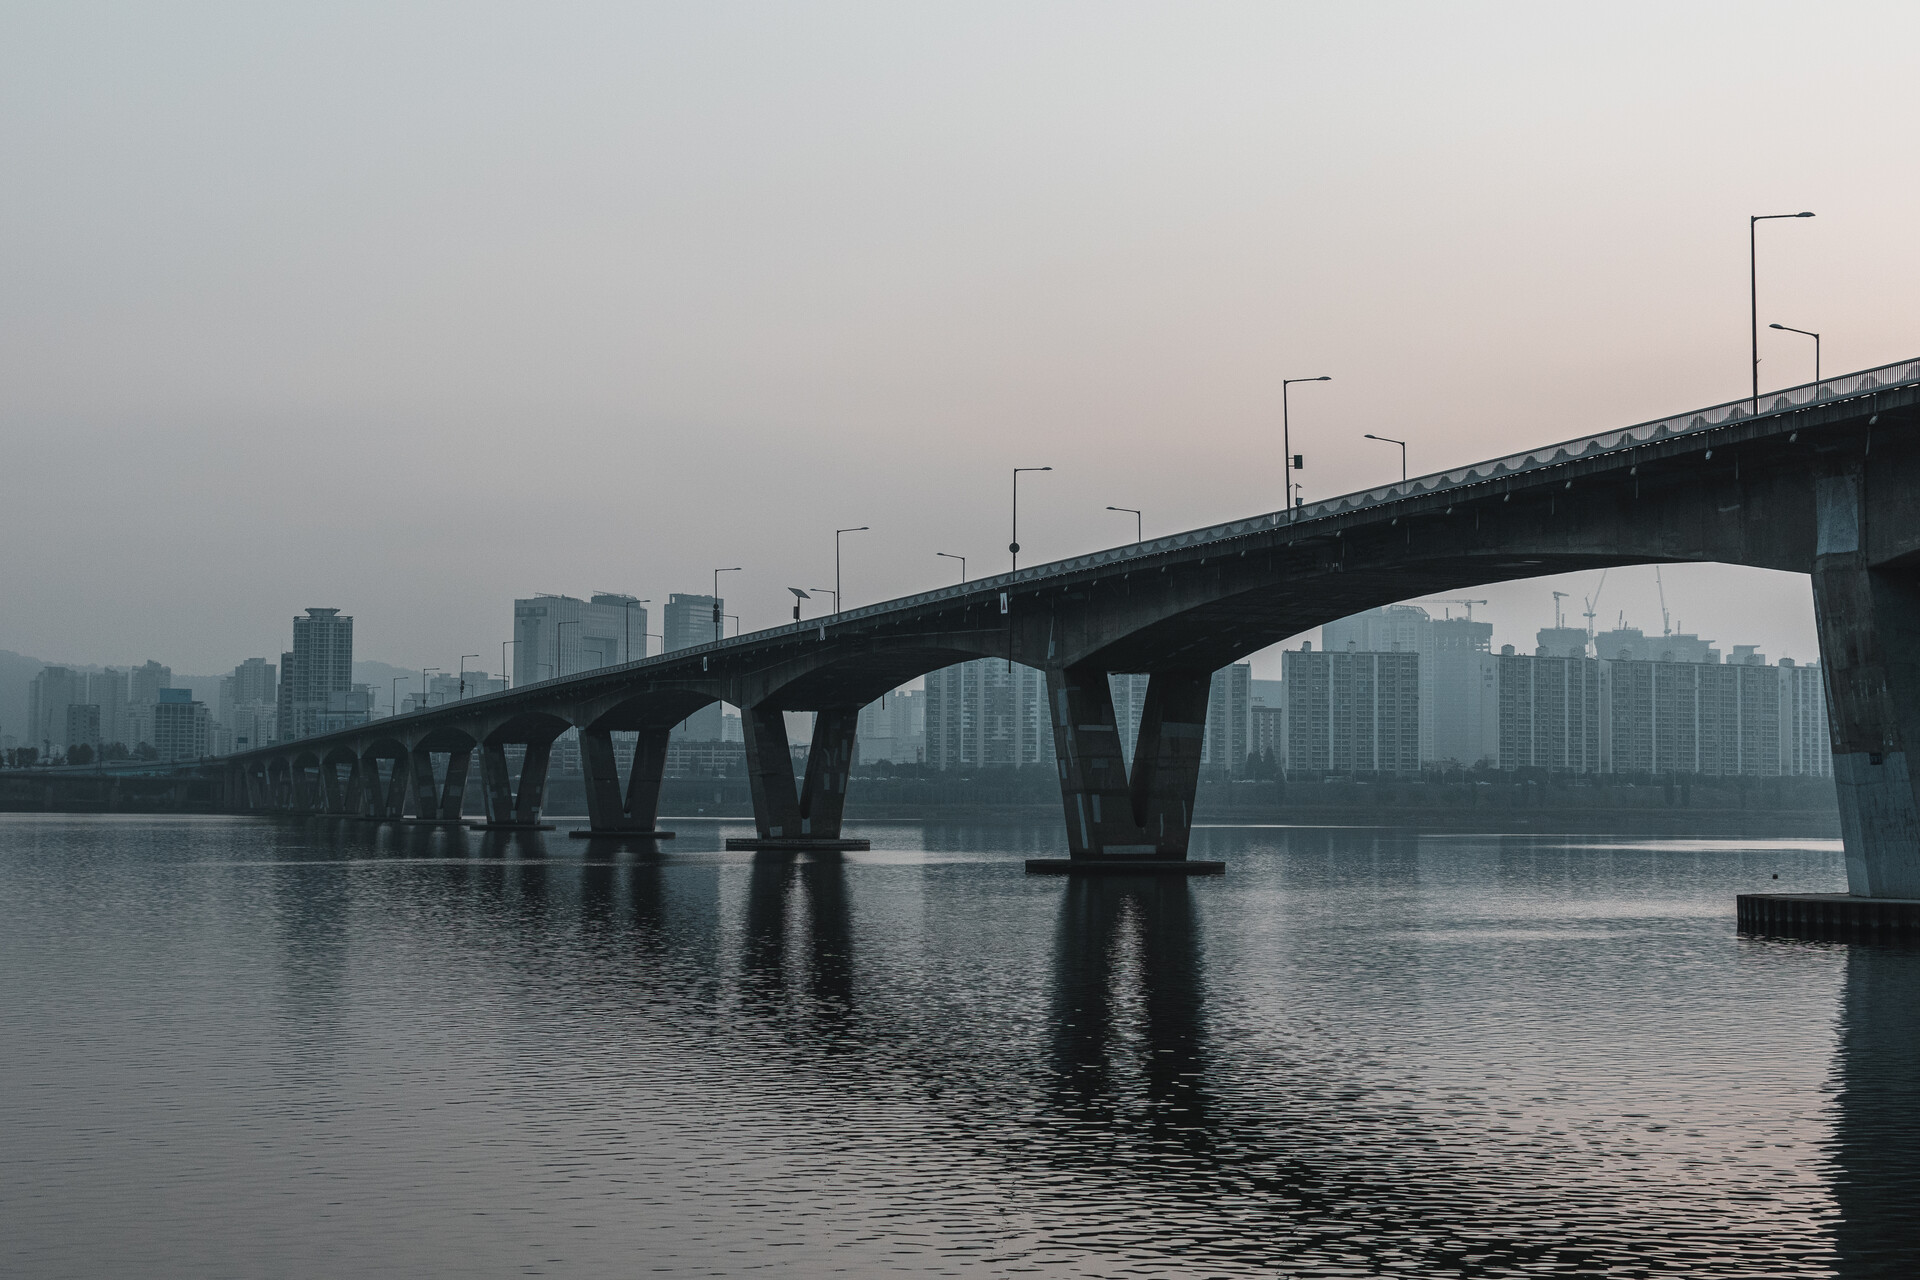 A bridge over the Han River. The River is more than 1 km wide!